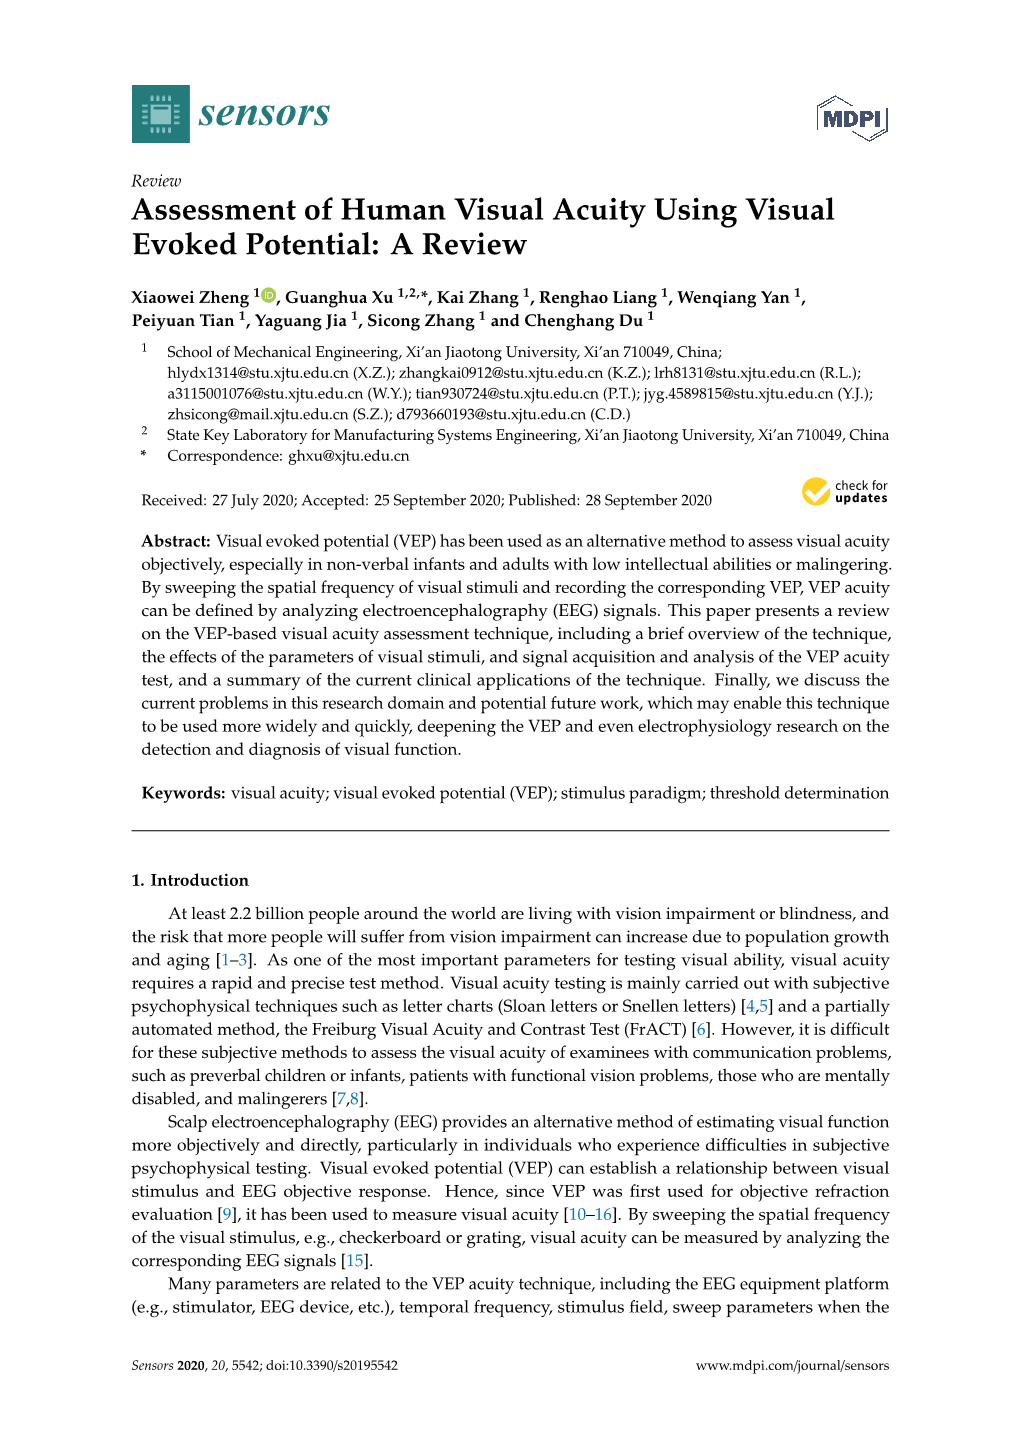 Assessment of Human Visual Acuity Using Visual Evoked Potential: a Review